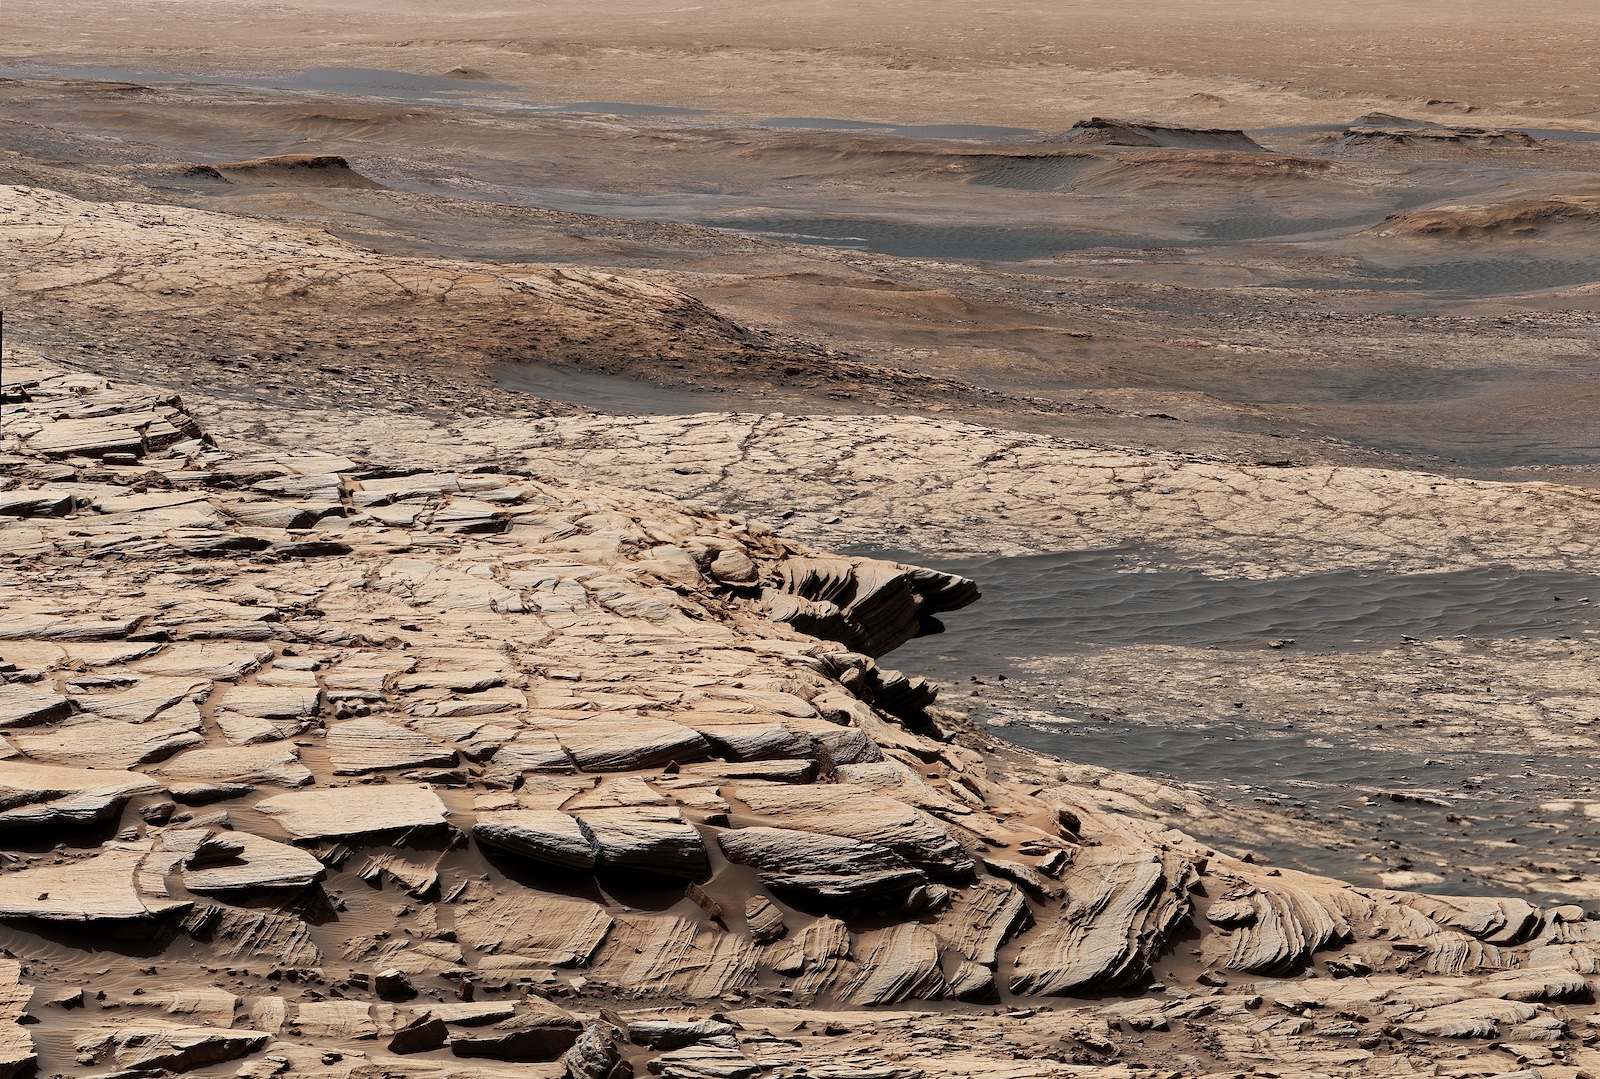 NASA's Curiosity Mars rover captured a partial image of a geologic feature called "Greenheugh Pediment." In the foreground is the crusty sandstone cap that stretches the length of the pediment, forming an overhanging ledge in some parts.